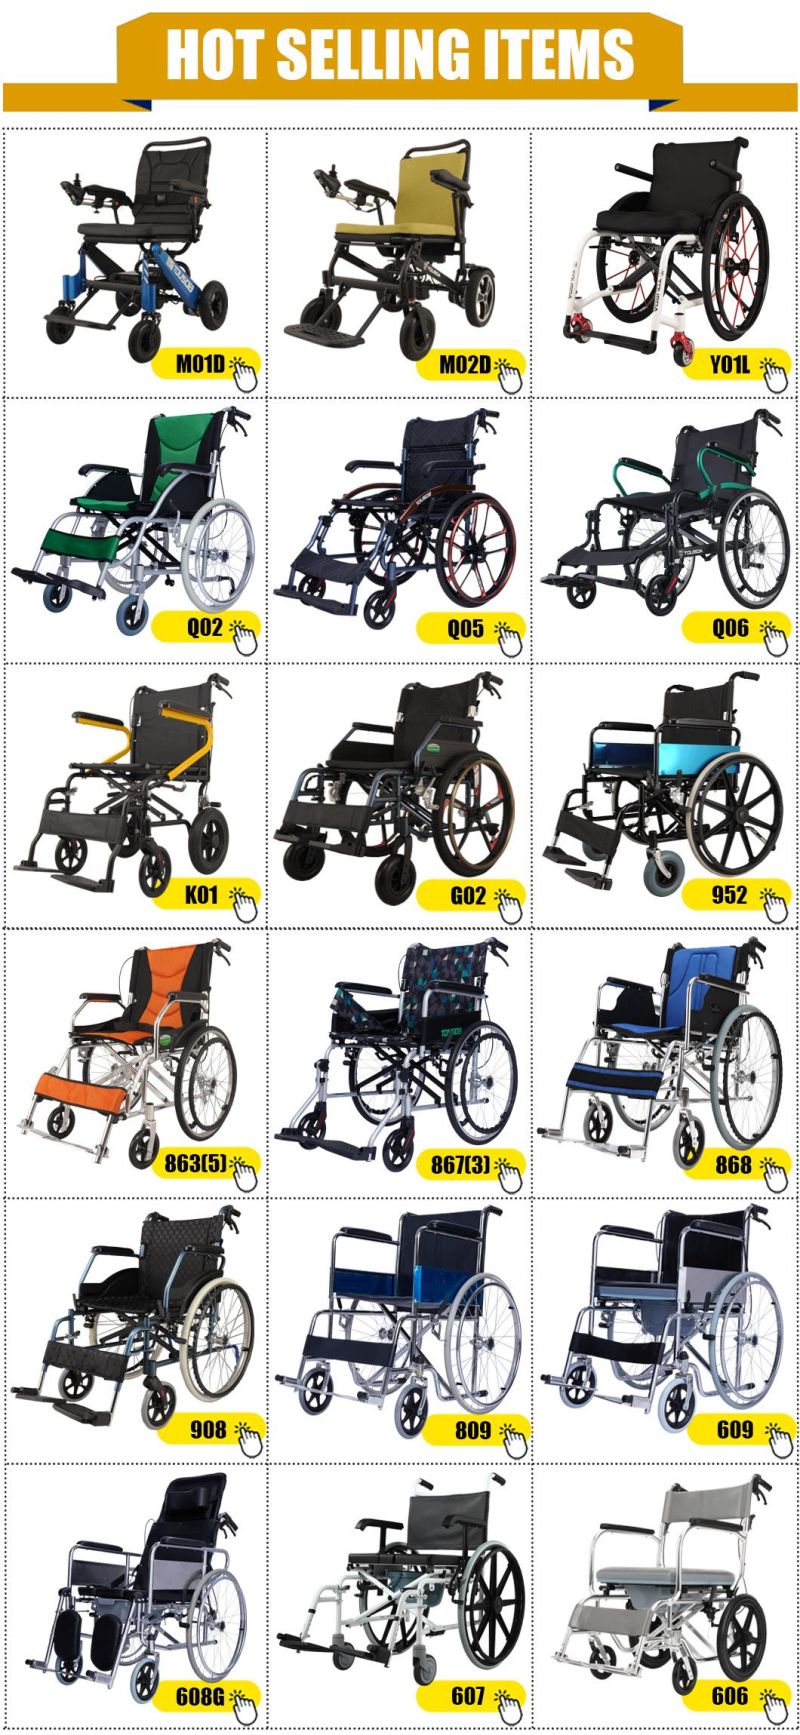 Silla De Ruedas Scooter Price Medical Aluminum Toilet Shower Commode Sport Folding Manual FDA Approved Powered Electric Automatic Wheelchair for Sale Cheap